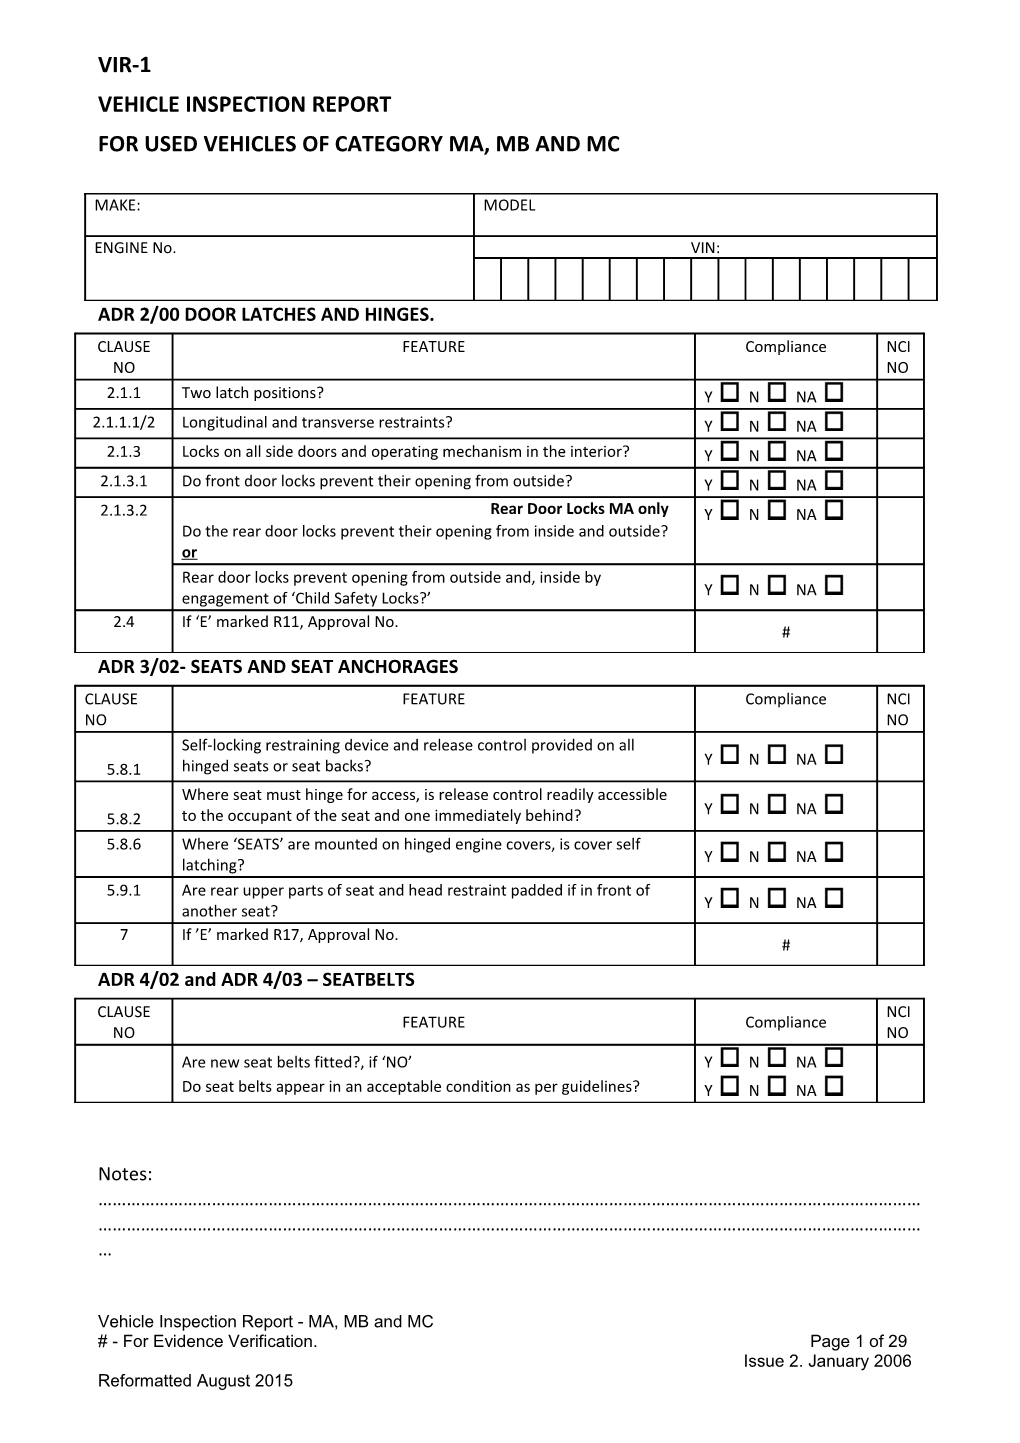 Vehicle Inspection Report s1